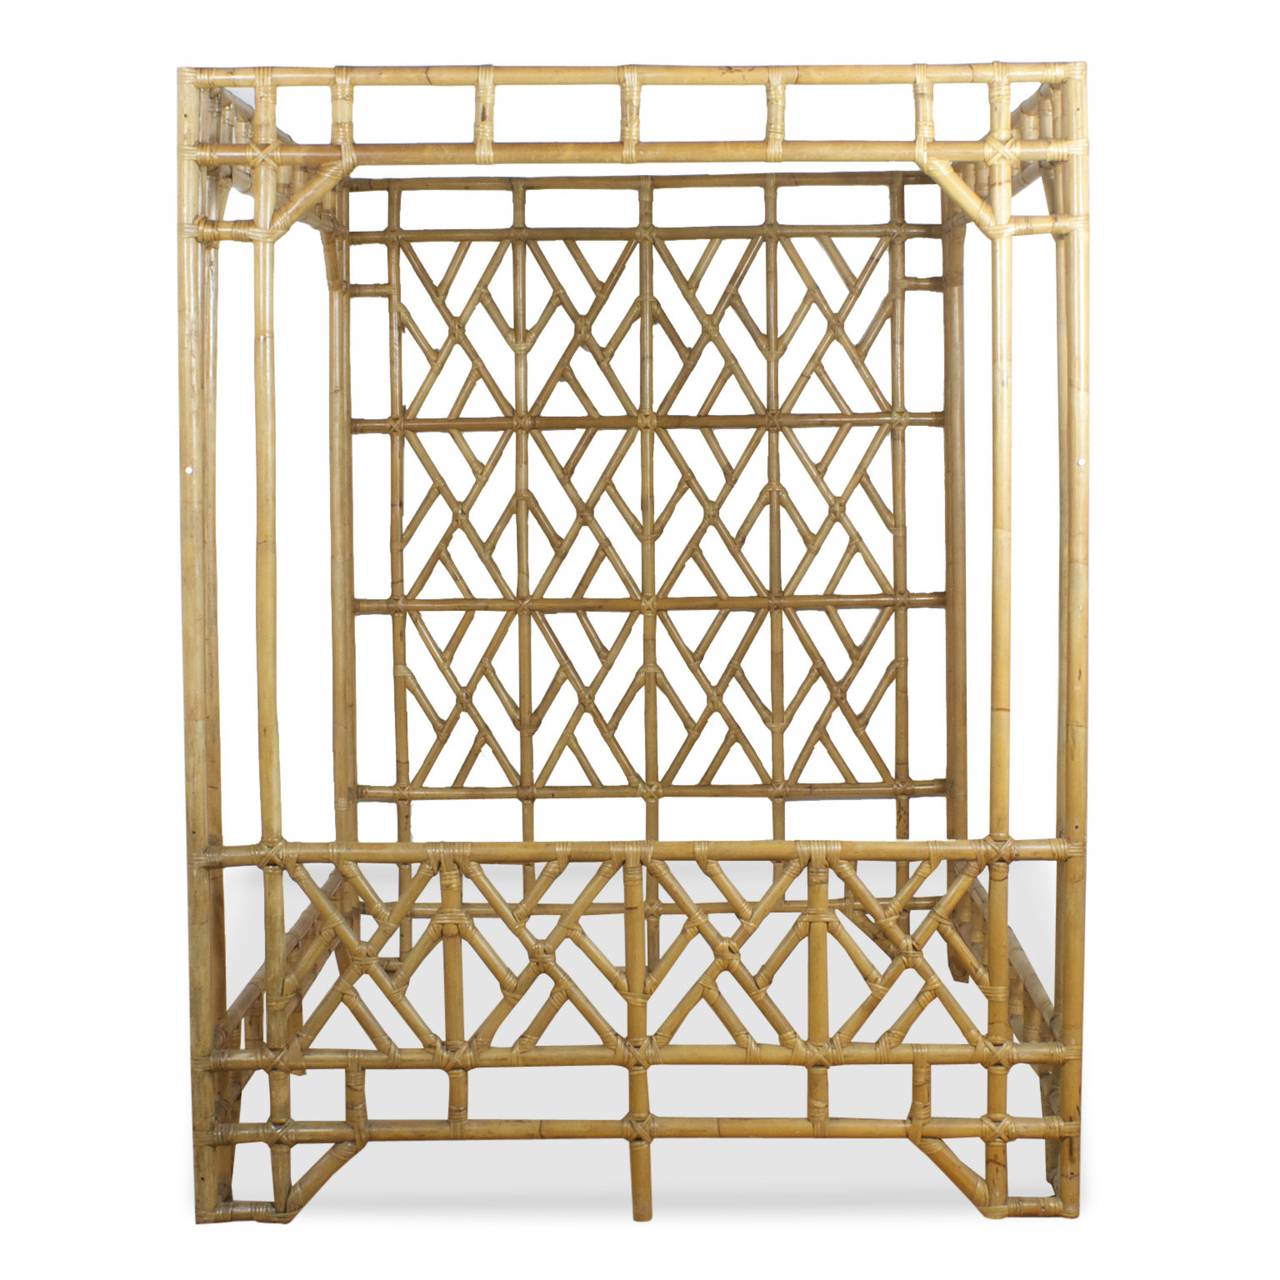 A dramatic queen size bamboo bed frame with a bold look. Made with the highest quality construction. This bed frame is a rare find and a room changer of the highest order. This stunning piece features Classic Chinese Chippendale, panels integrated